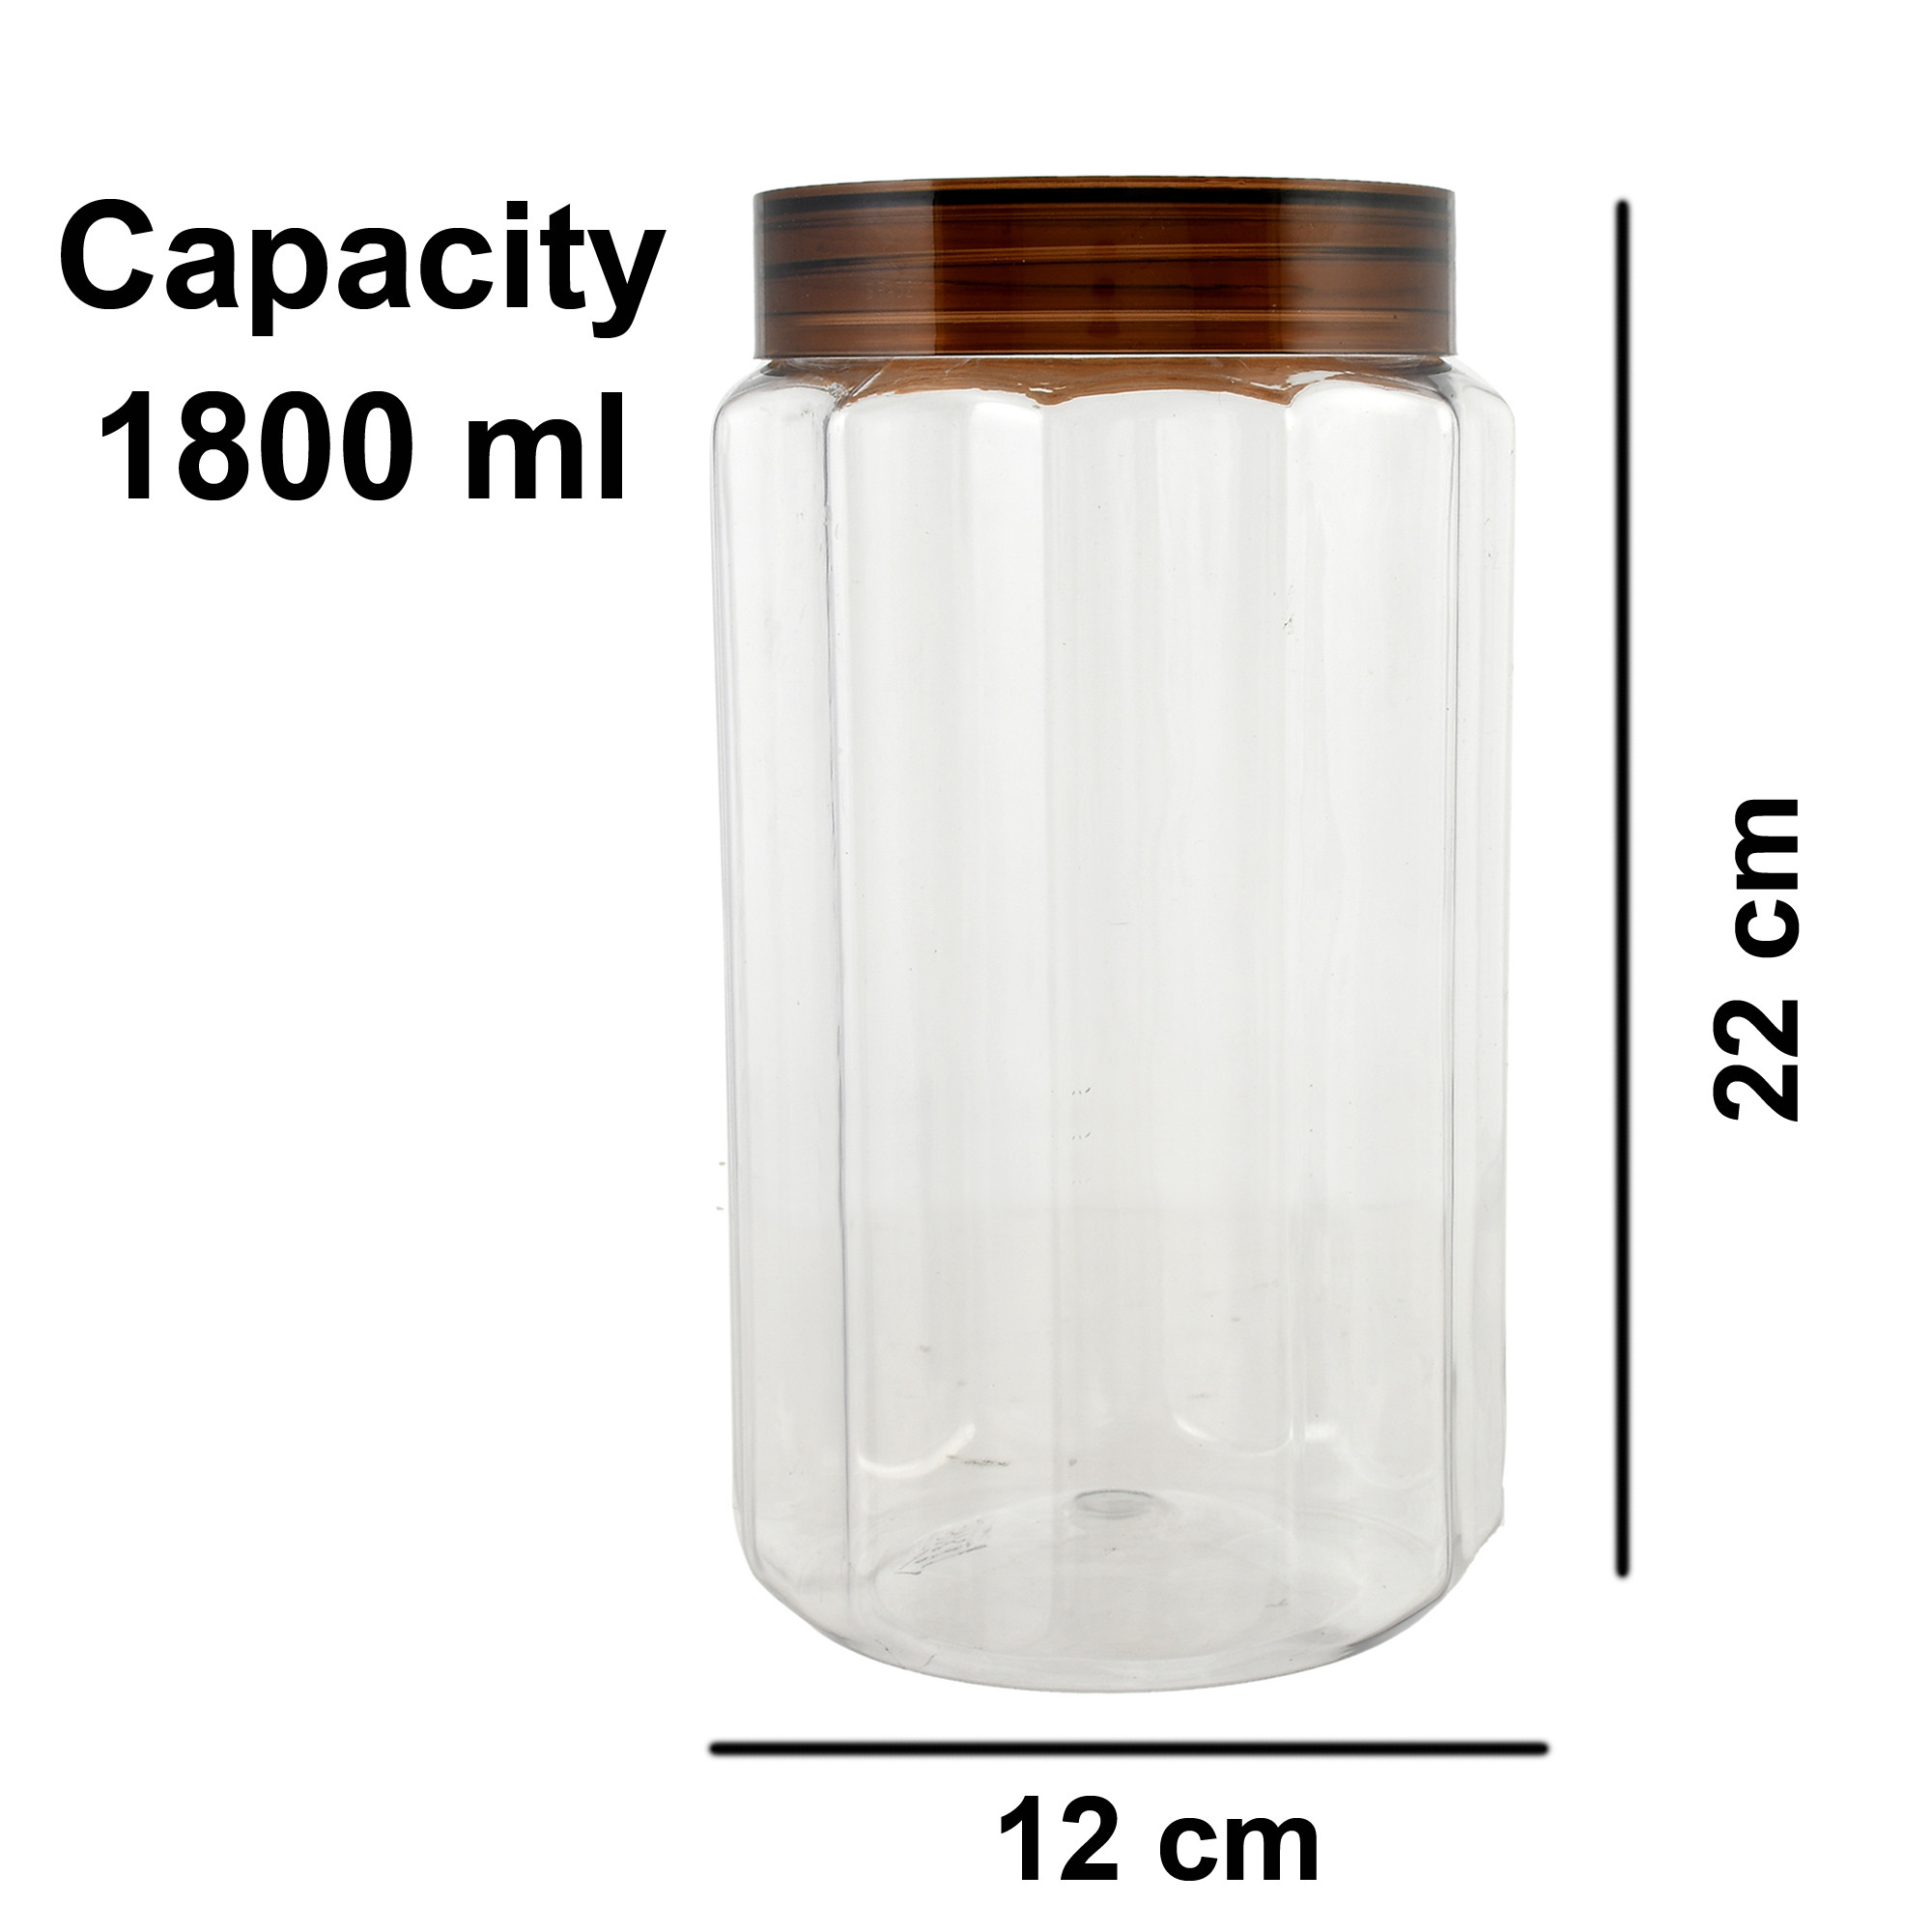 Kuber Industries Opal Airtight Food Storage Containers Kitchen Containers for Storage Set Plastic Storage Box for Kitchen Airtight Containers Storage Jar Set for Kitchen Storage (1800 ml, Brown)